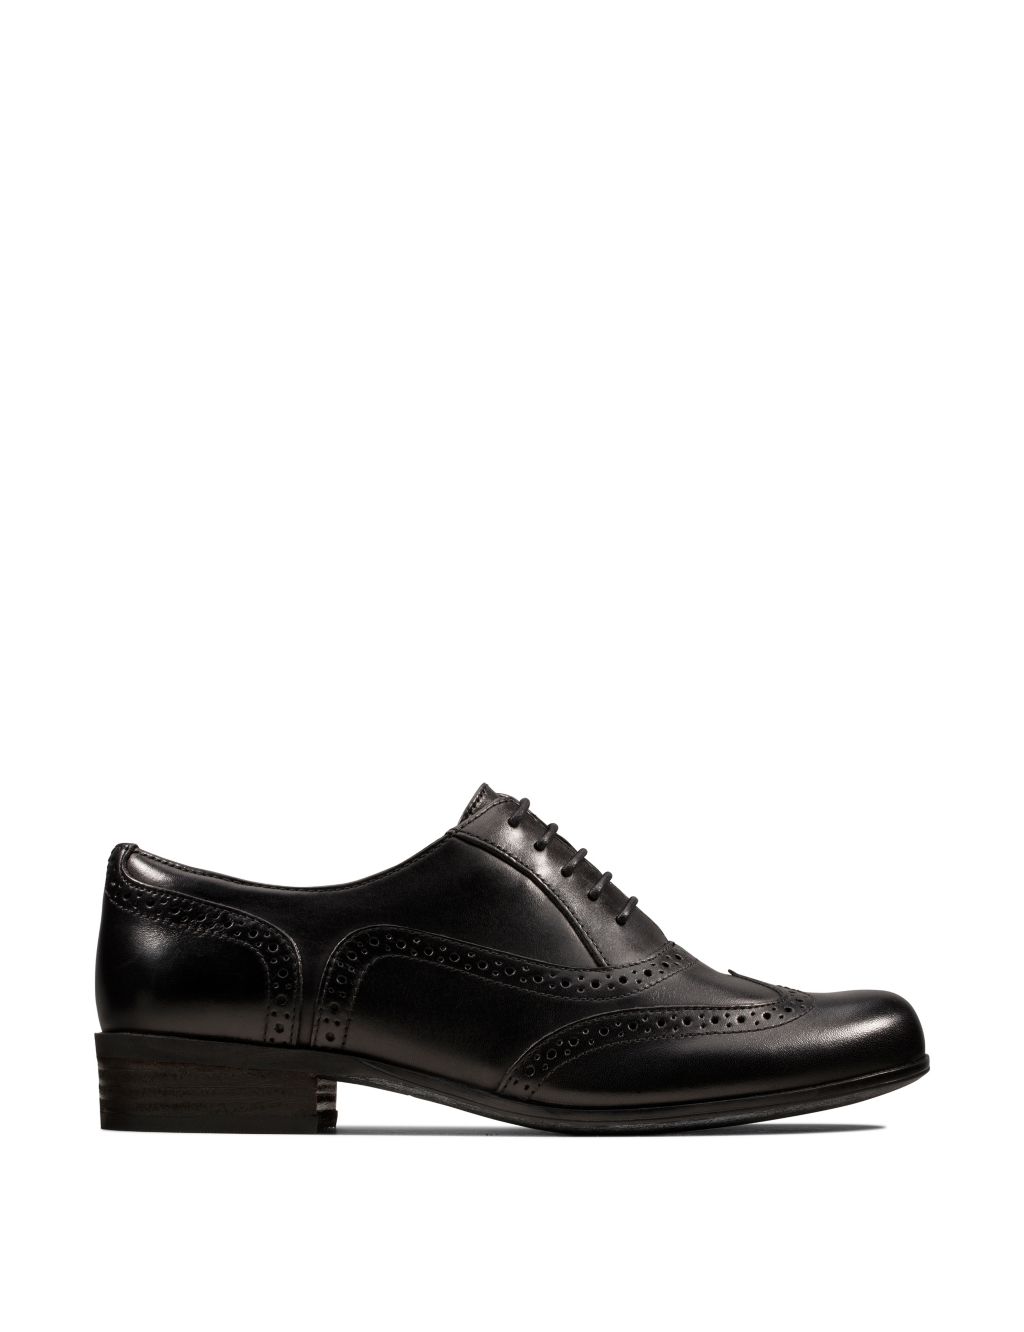 Leather Lace Up Brogues image 1